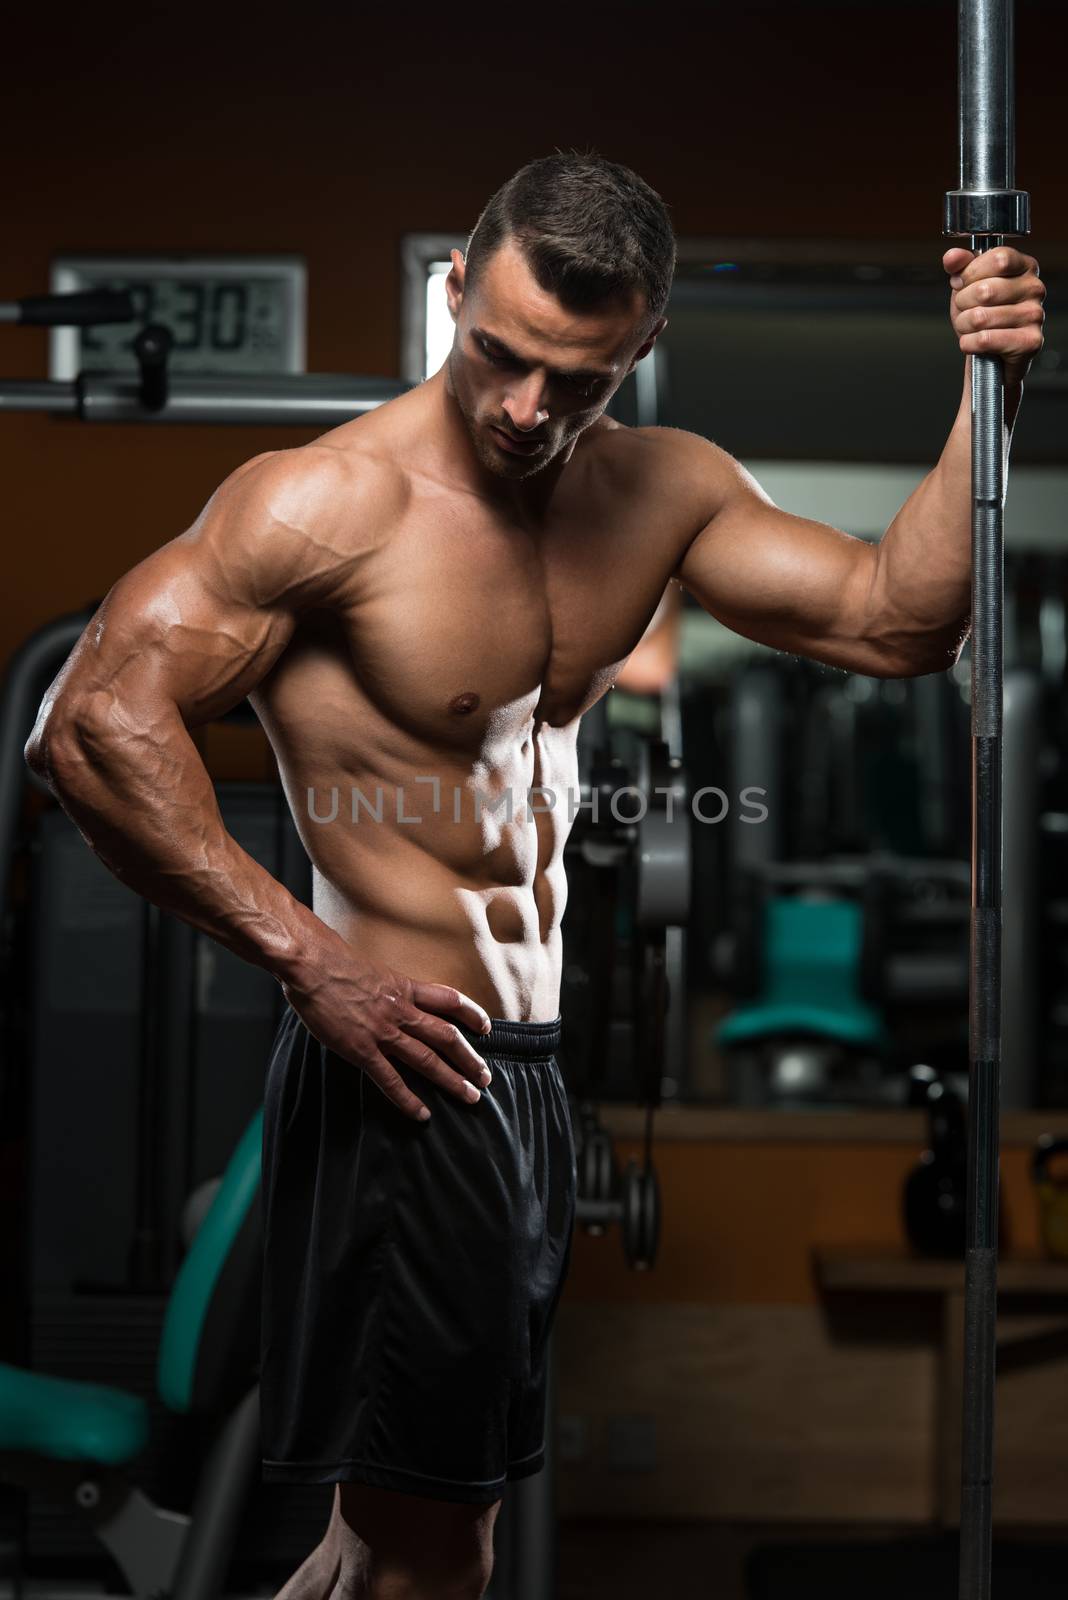 Sexy Muscular Man Rest After Exercises by JalePhoto